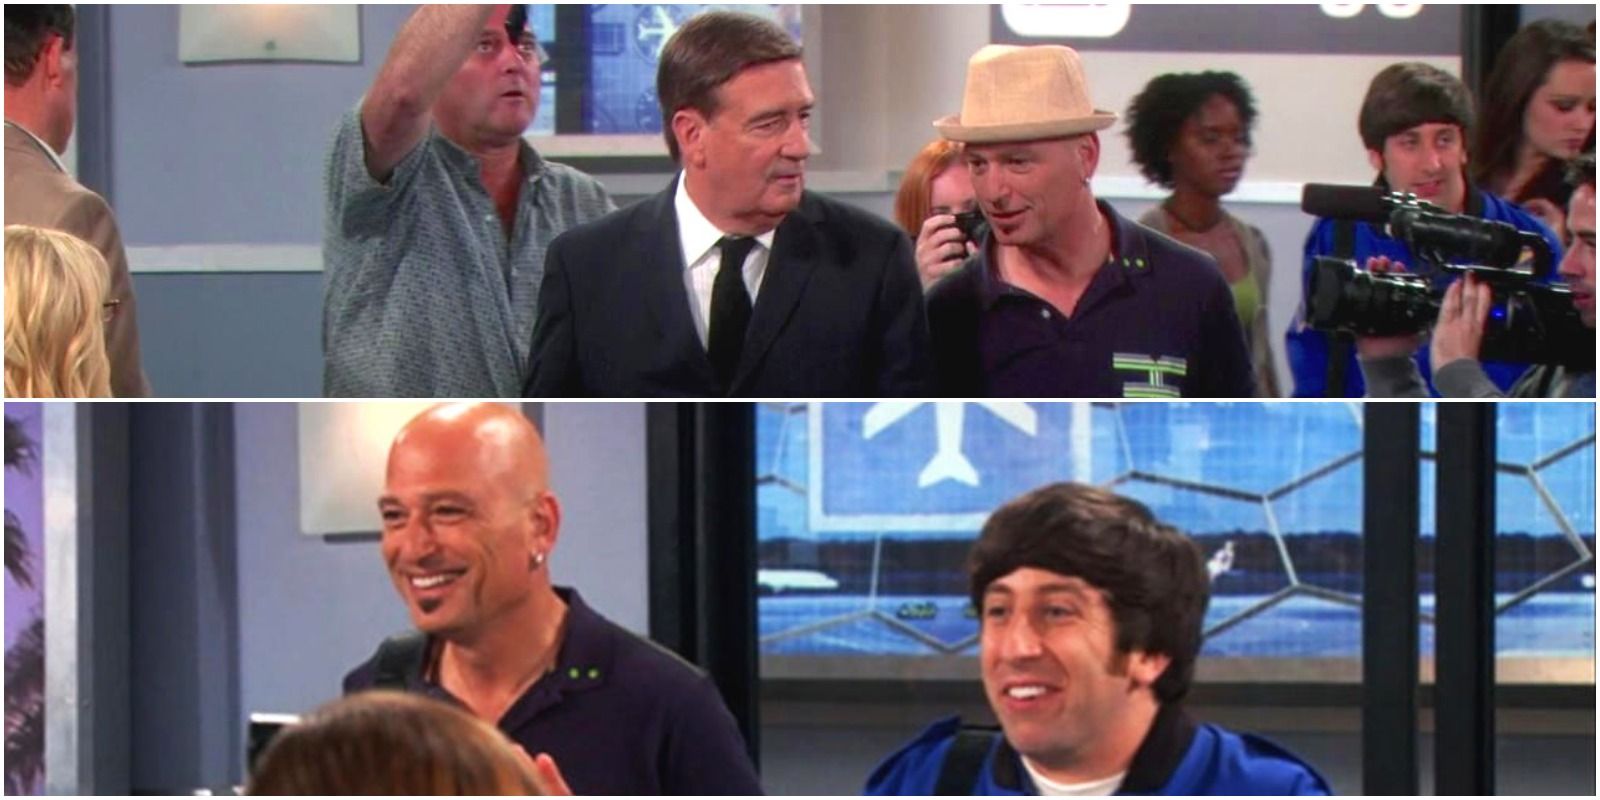 Howie Mandel and Howard Wolowitz greeting paparazzi from the Big Bang Theory